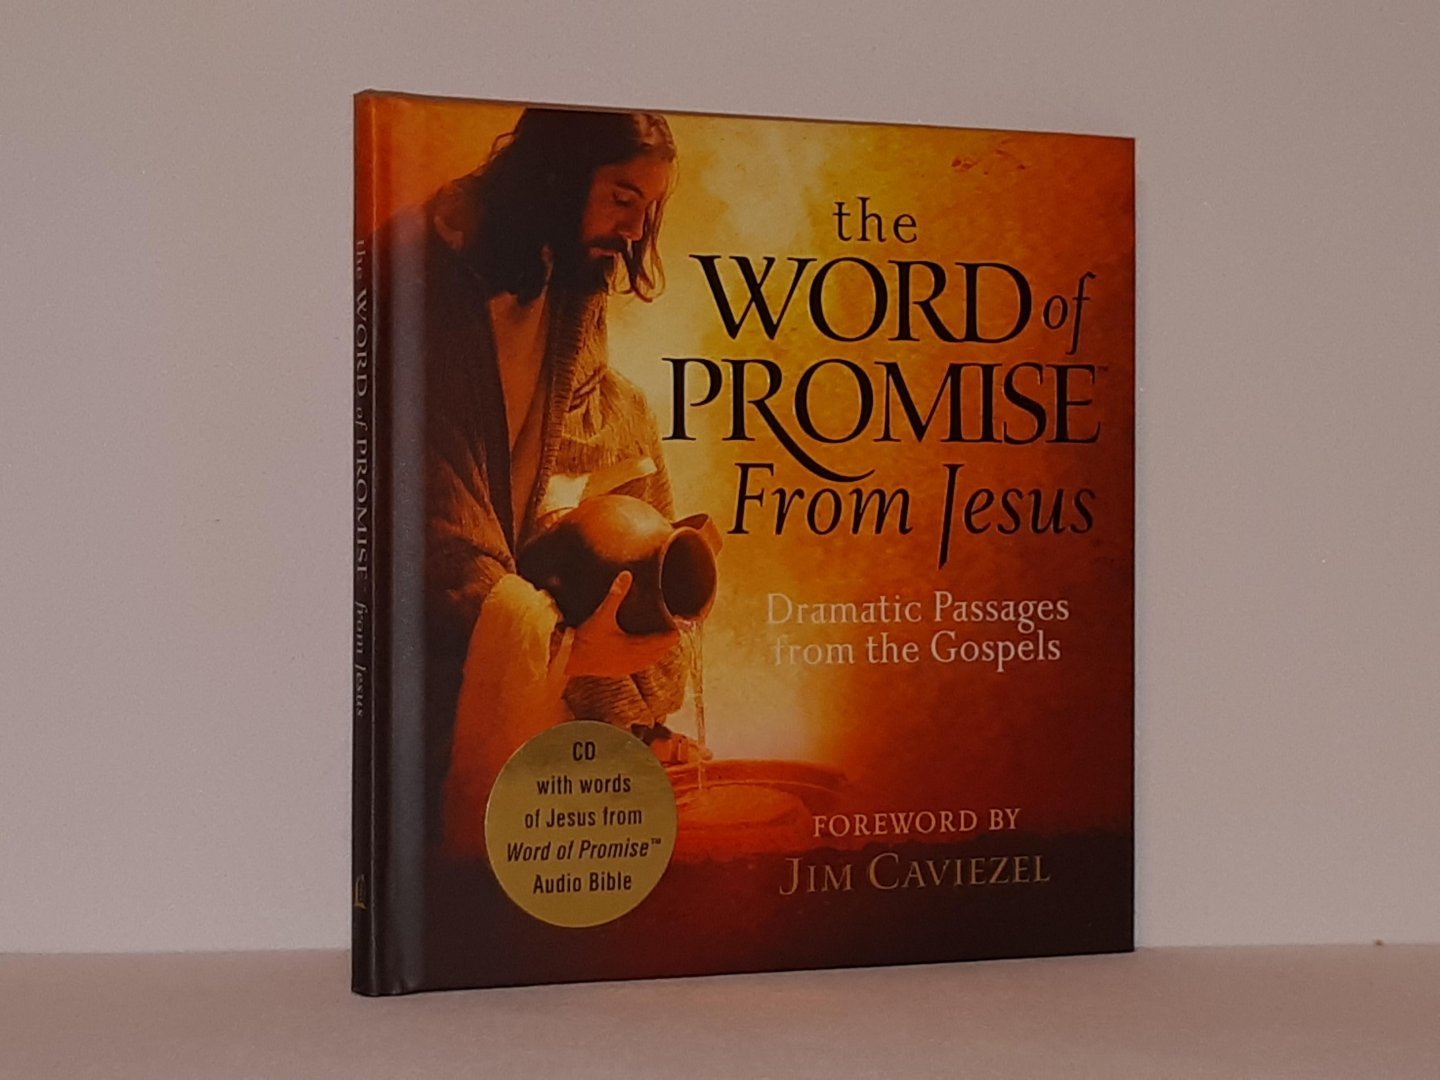 Caviezel, Jim - The Word of Promise from Jesus. Dramatic Passages from the Gospels [With CD]